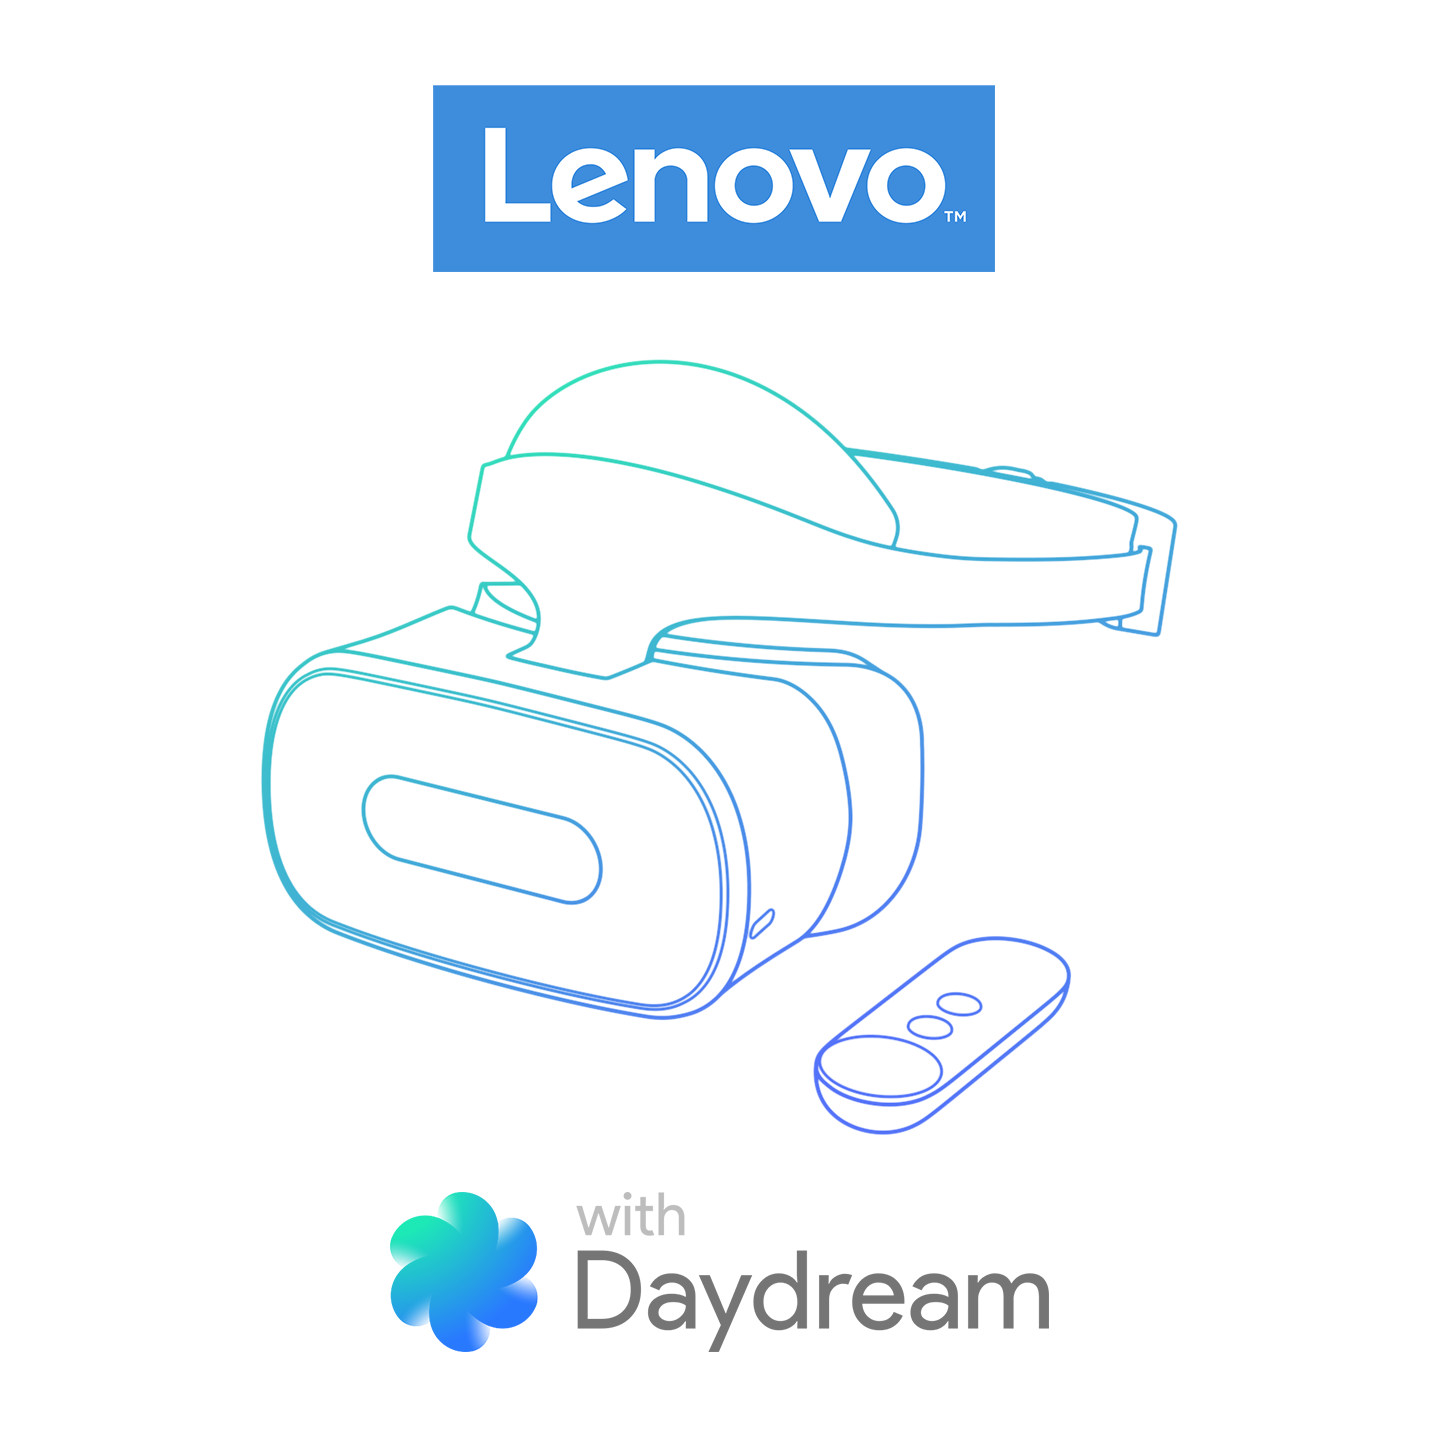 Lenovo Standalone with Daydream